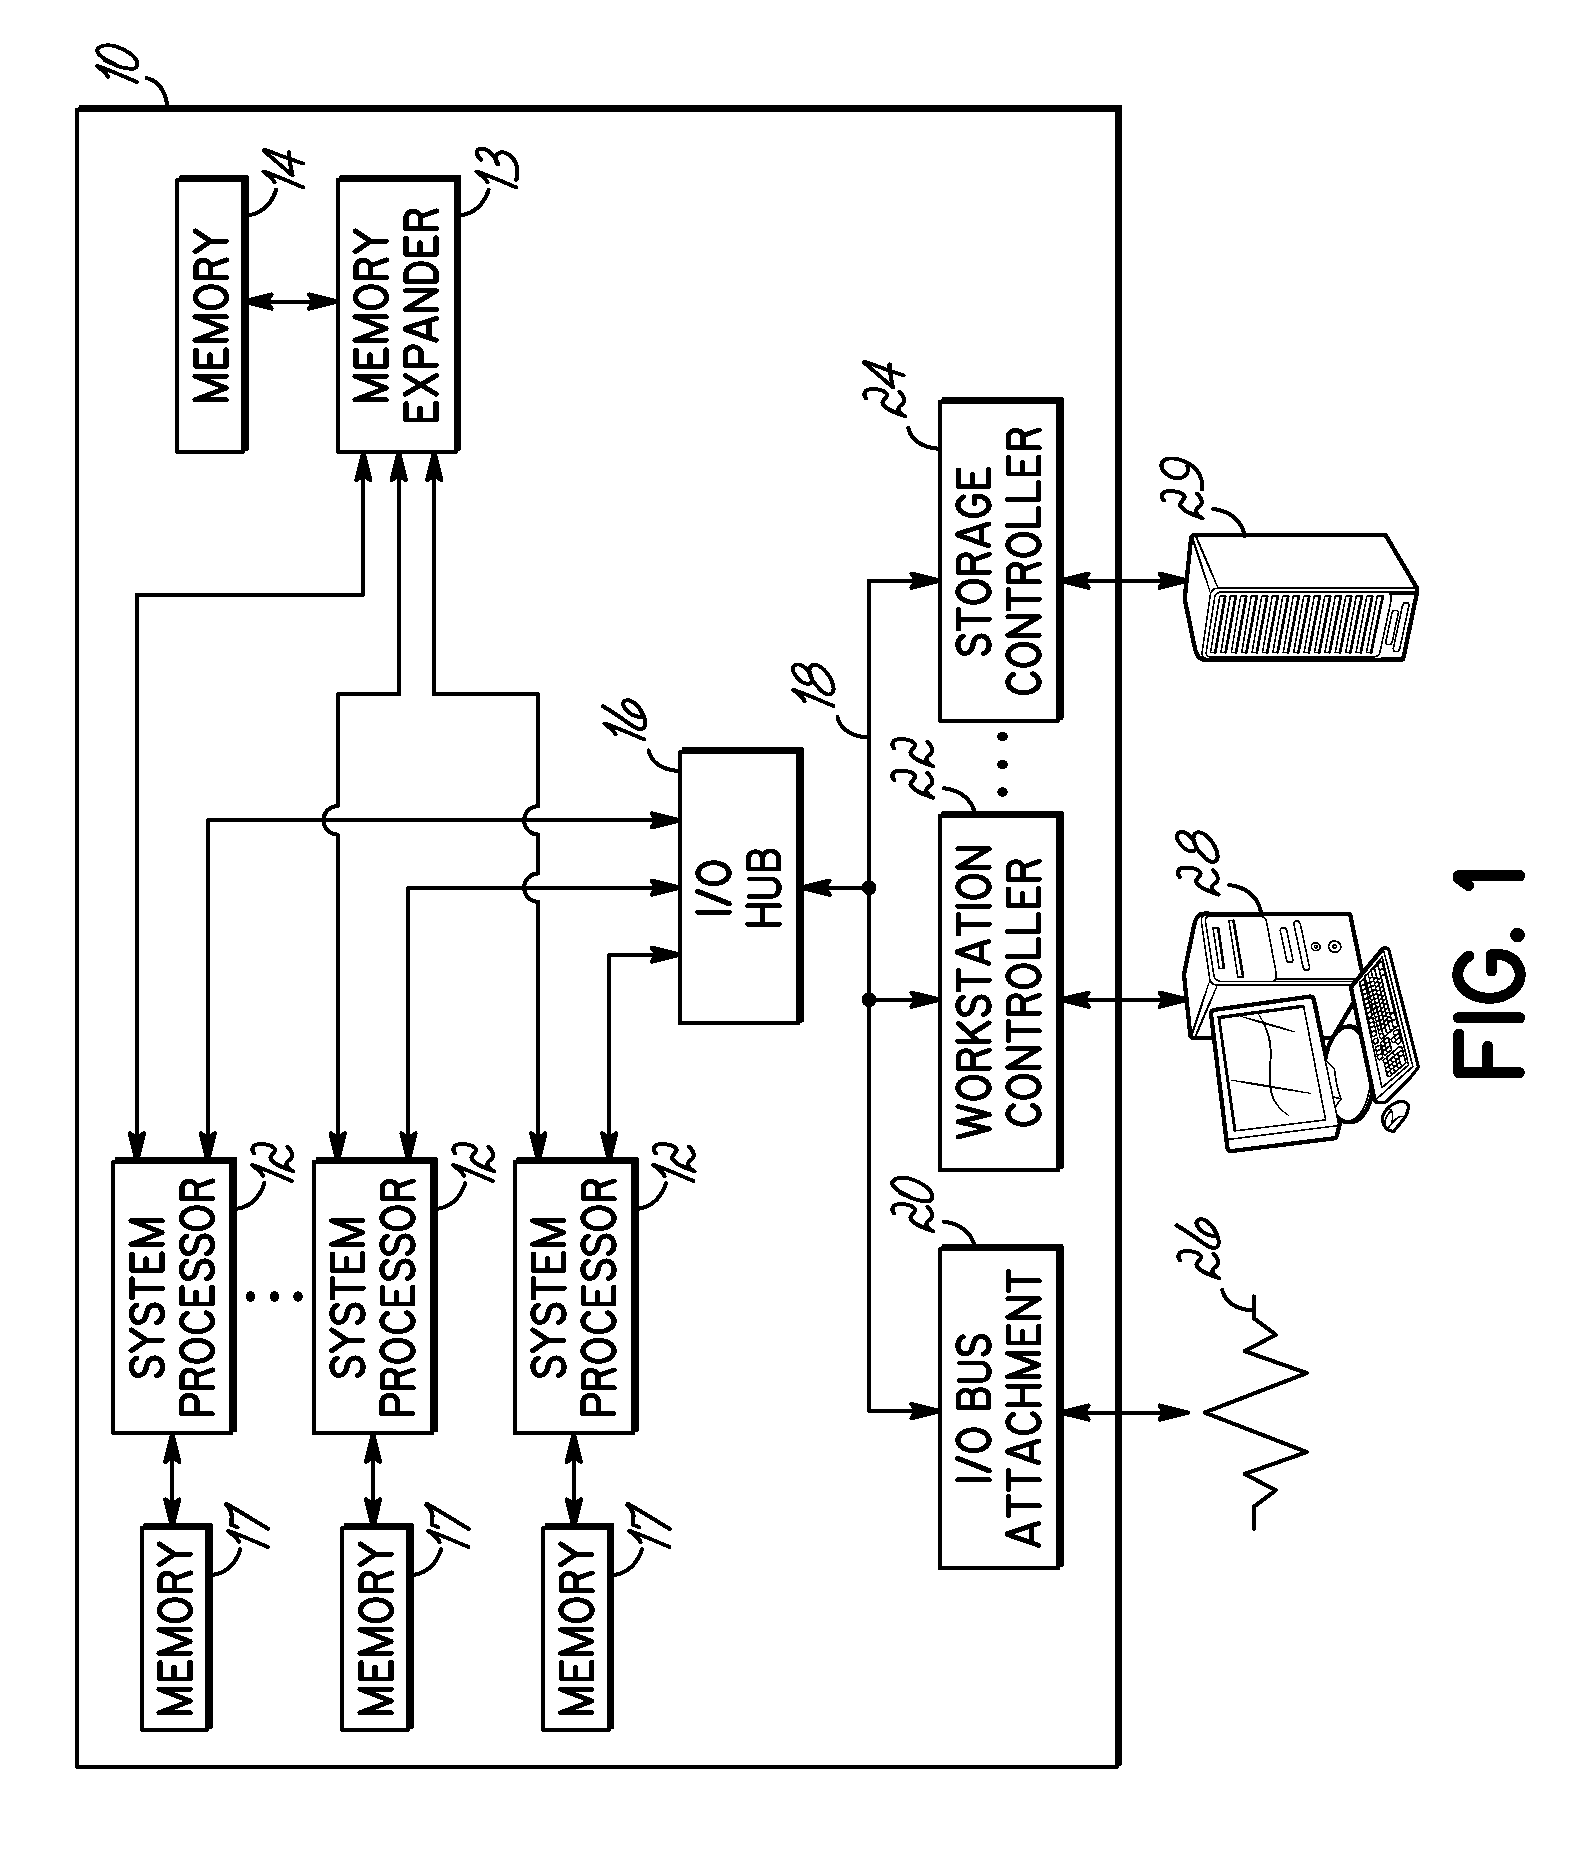 Memory compression implementation in a multi-node server system with directly attached processor memory